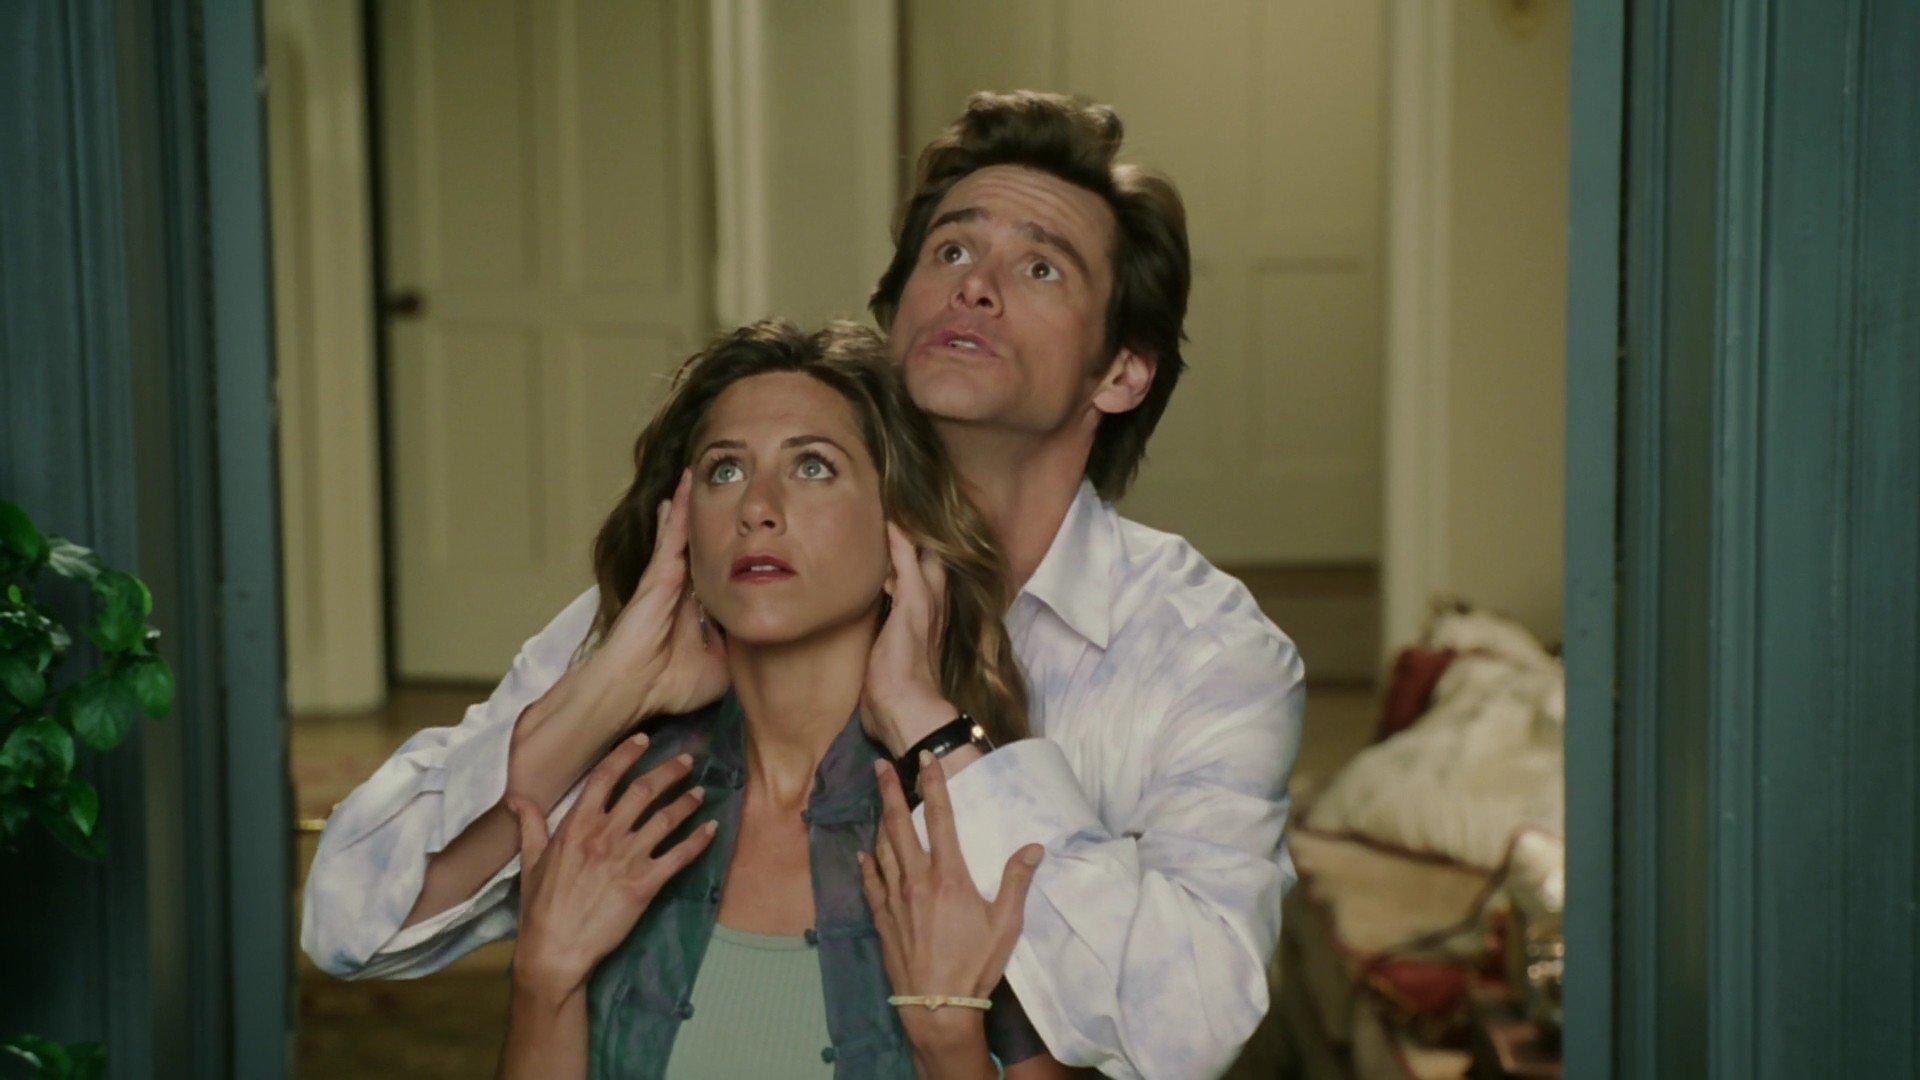 Jennifer Aniston and Jim Carrey in a scene from Almighty